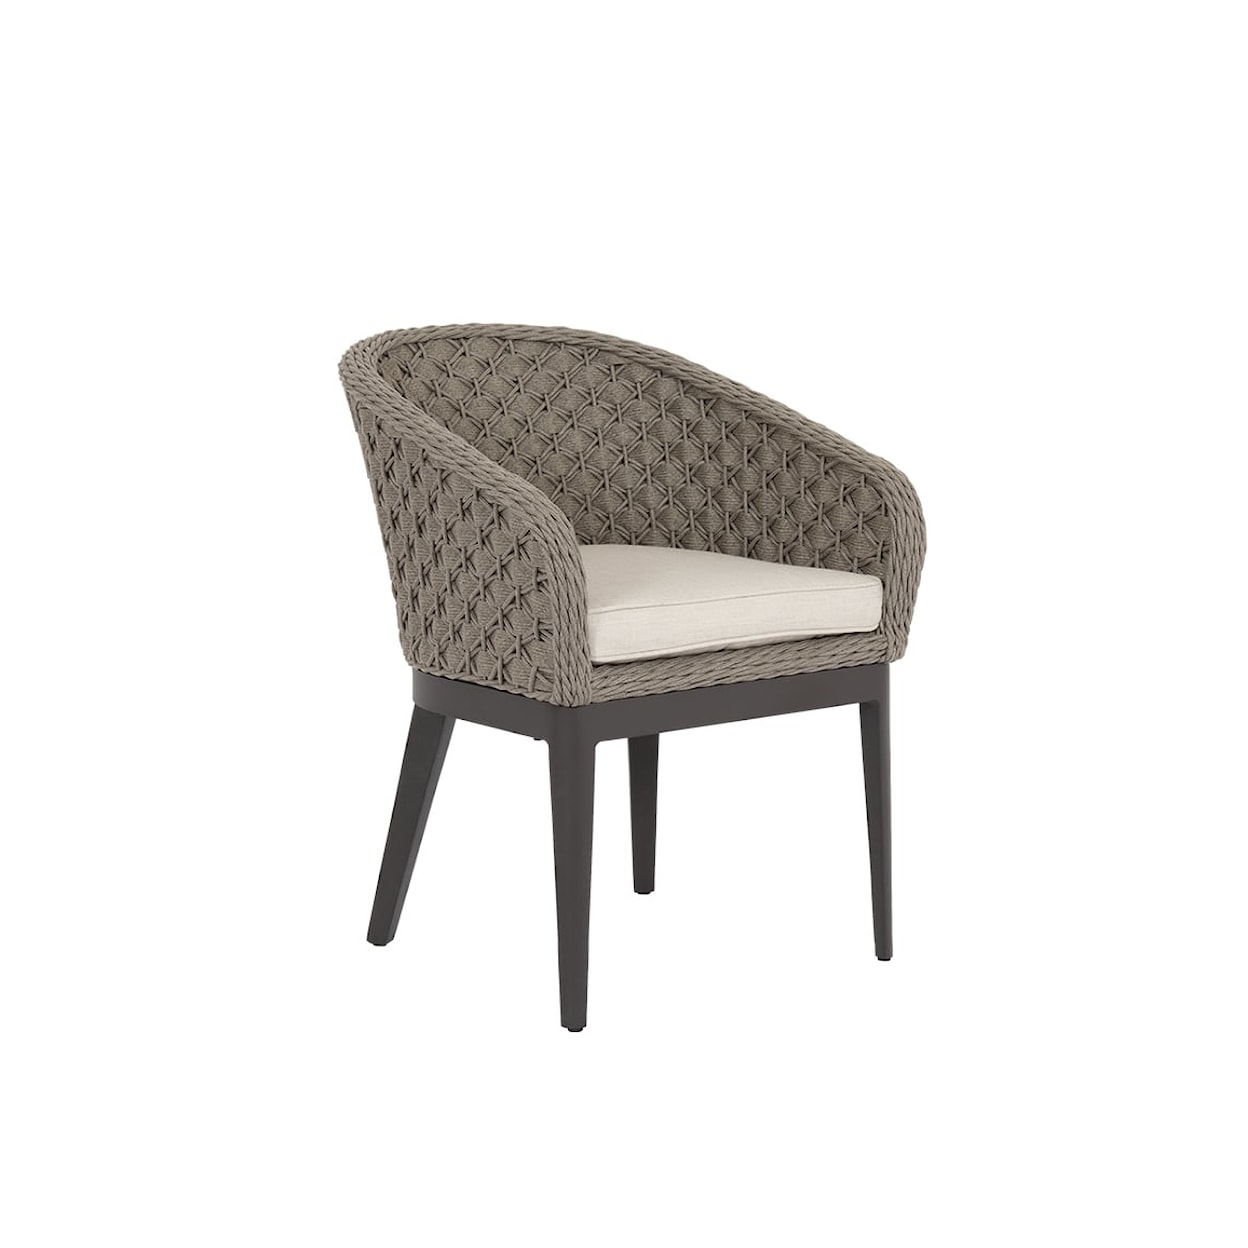 Sunset West Marbella Upholstered Dining Chair